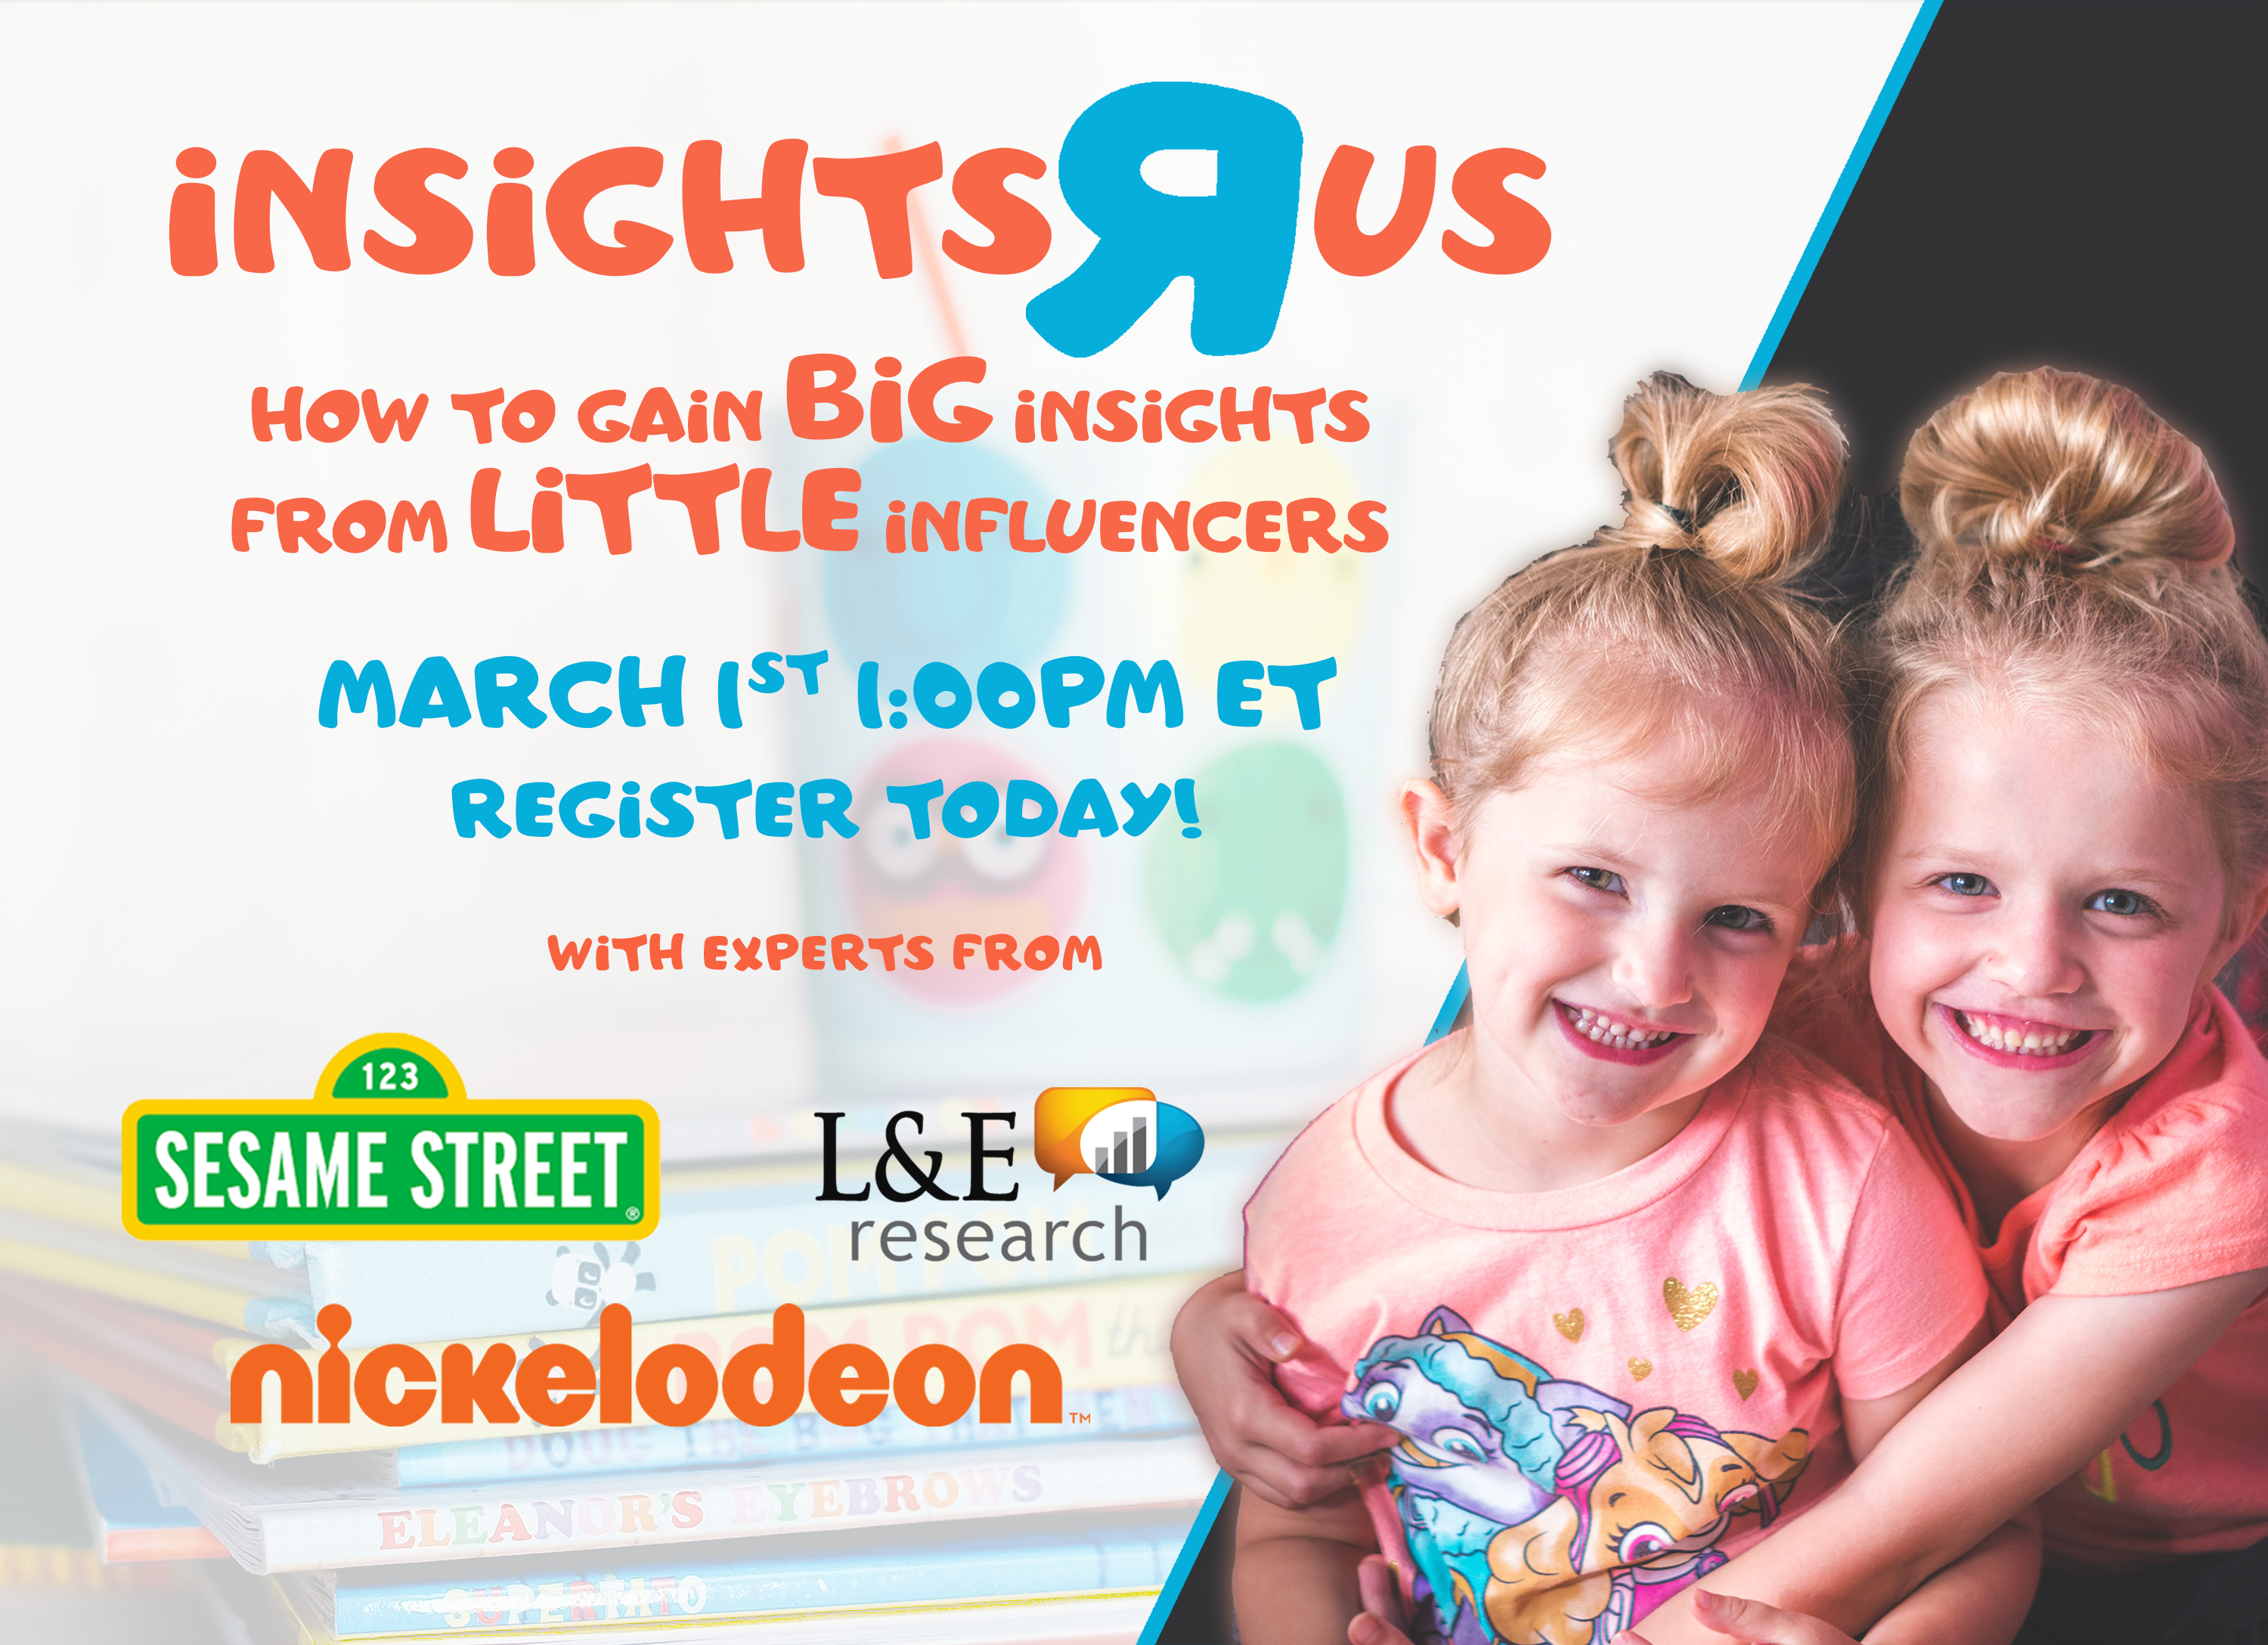 Insights R Us: How to Gain Big Insights From Little Influencers